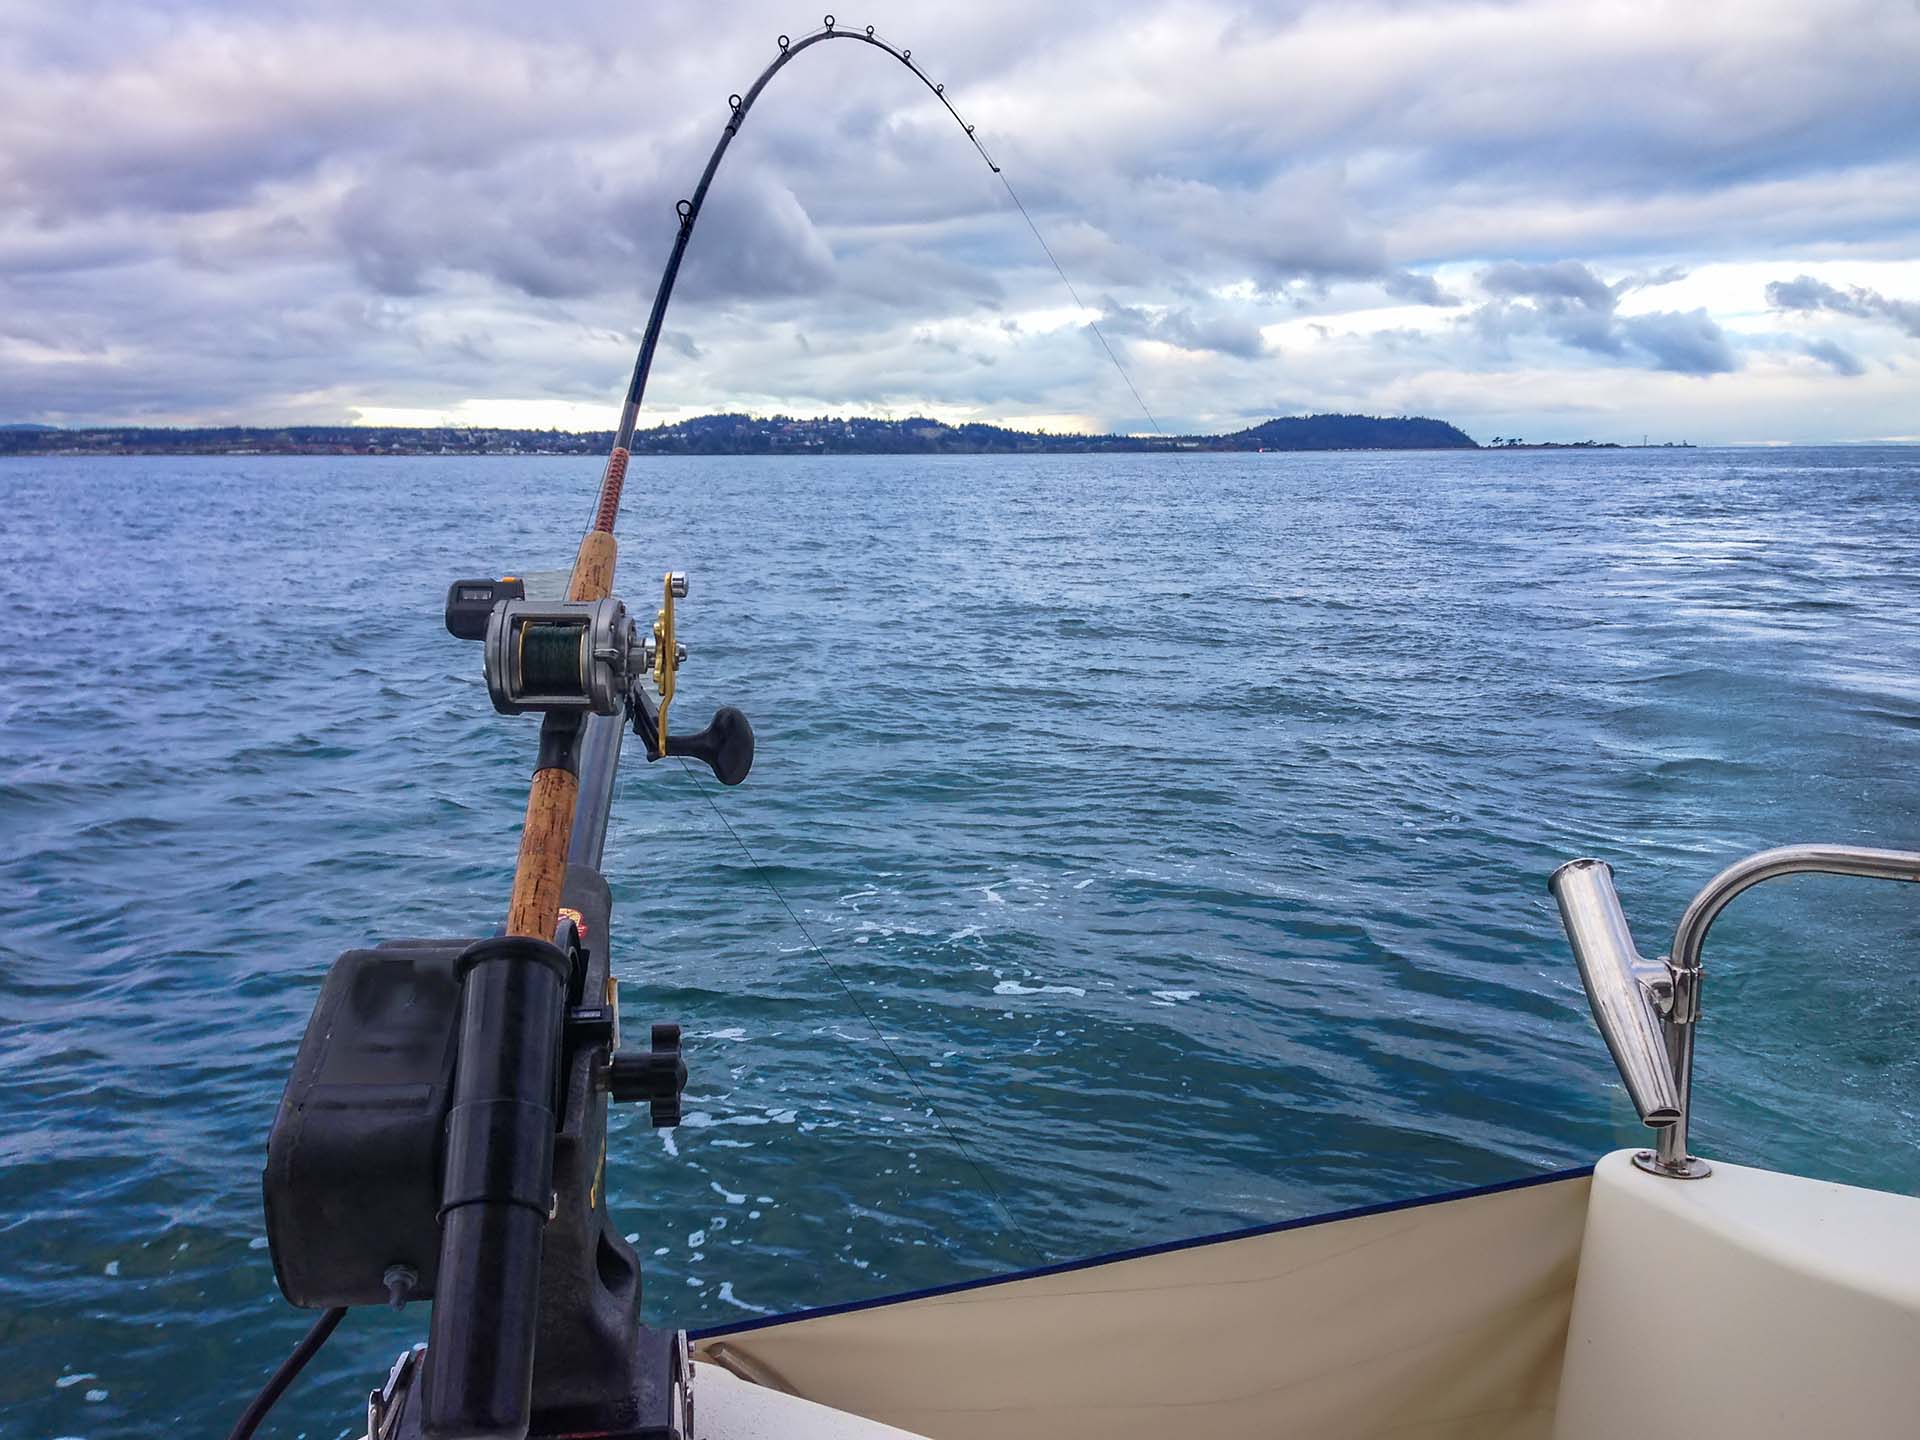 Inshore fishing rod on a boat